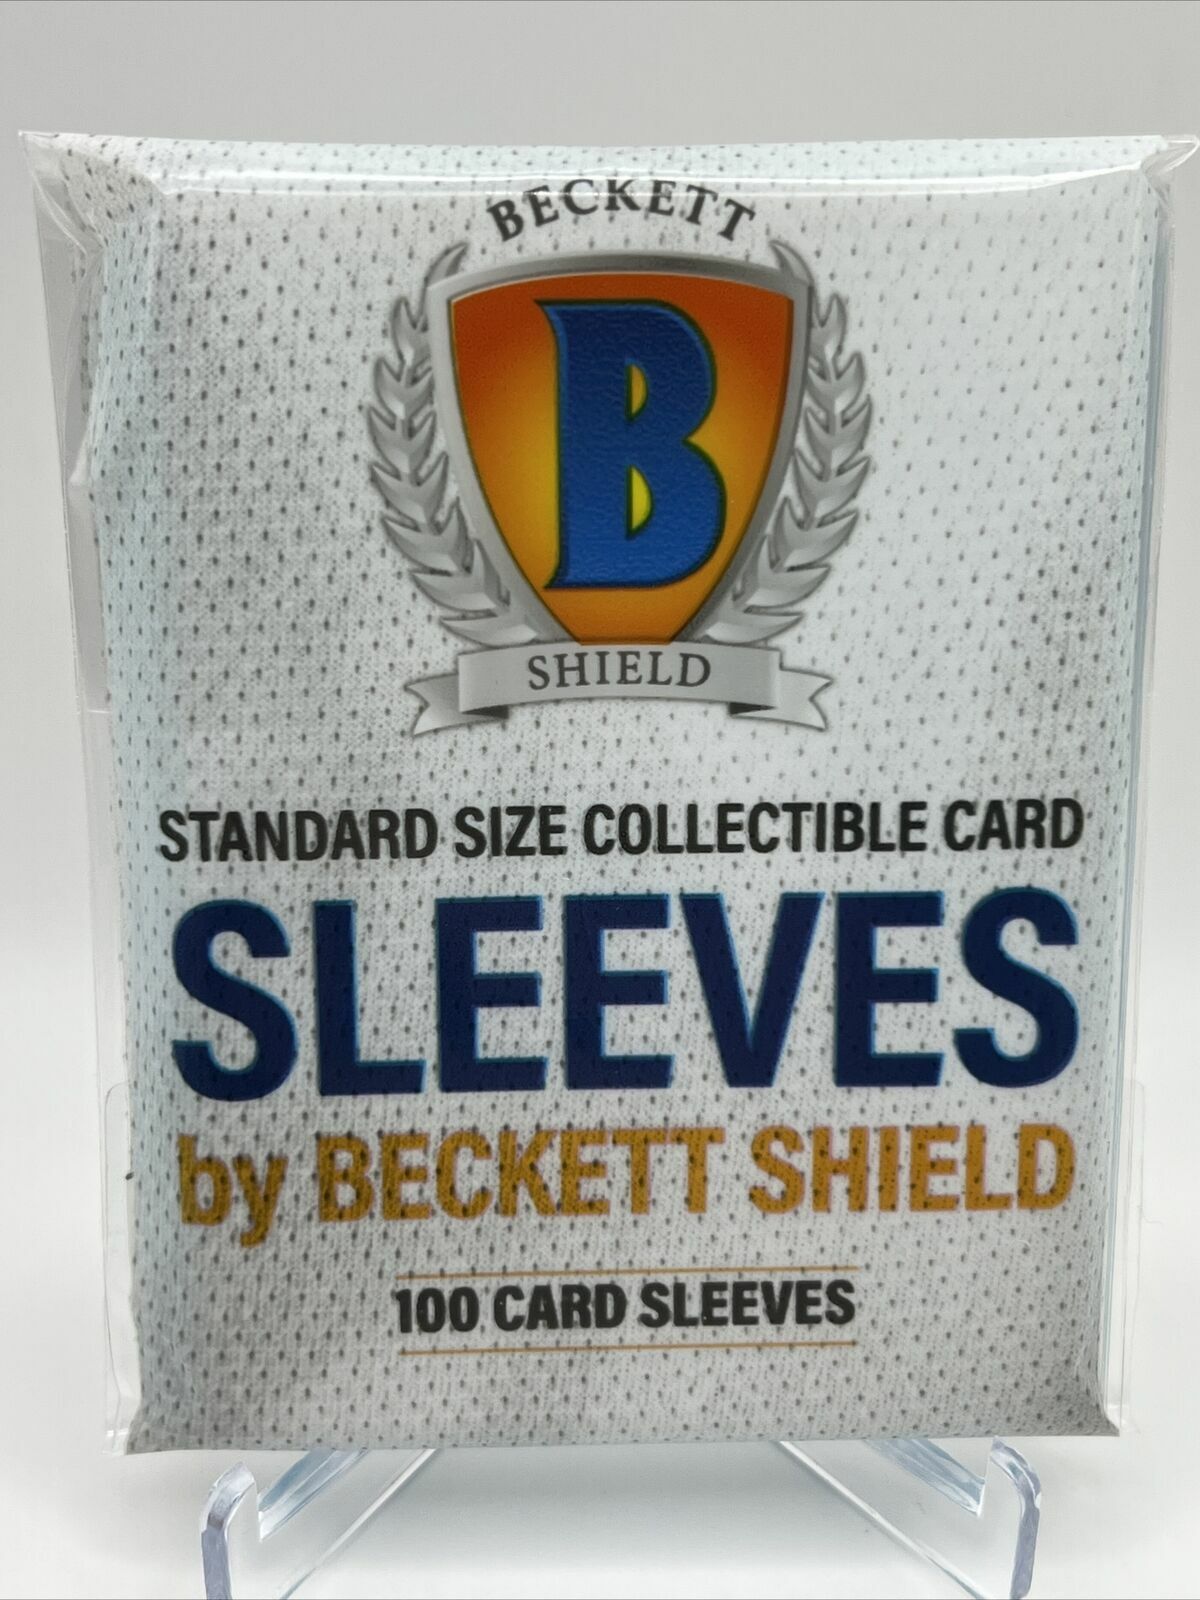 Beckett Shield Soft Penny Card Sleeves Pack of 100 YOU CHOOSE QUANTITY